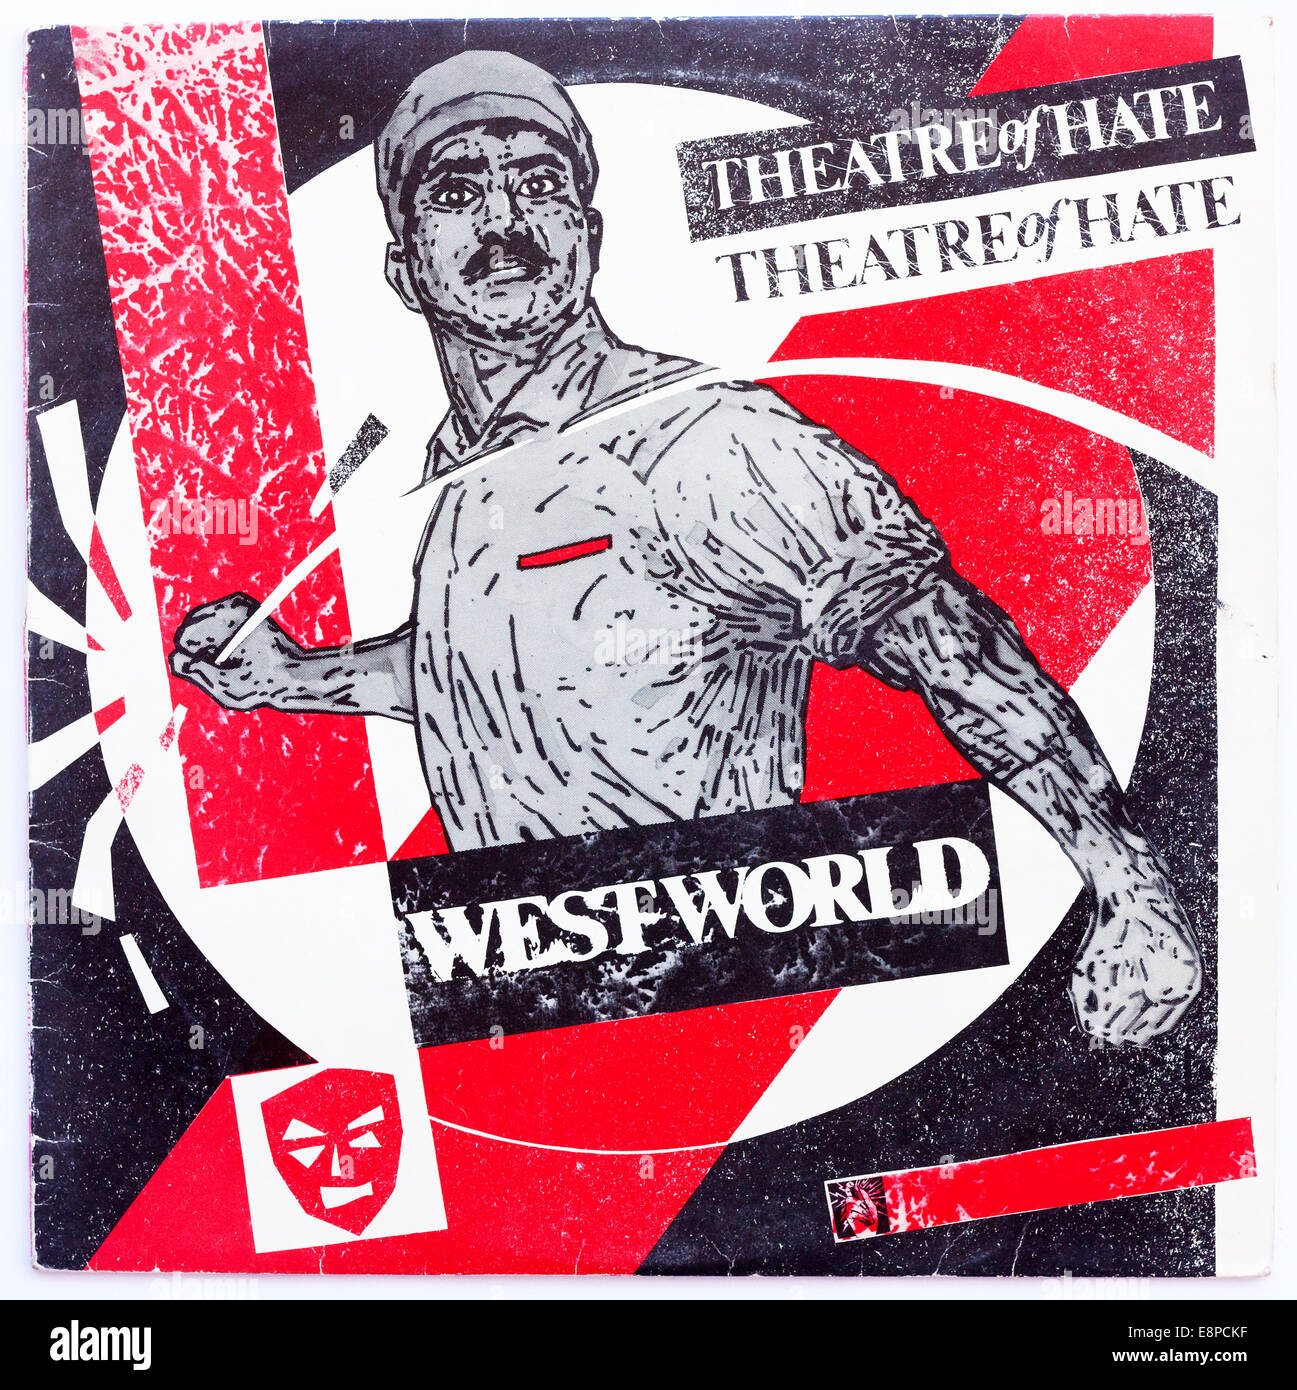 Cover art for Theatre Of Hate - Westworld, 1982 vinyl album on Burning Rome Records - Editorial use only Stock Photo